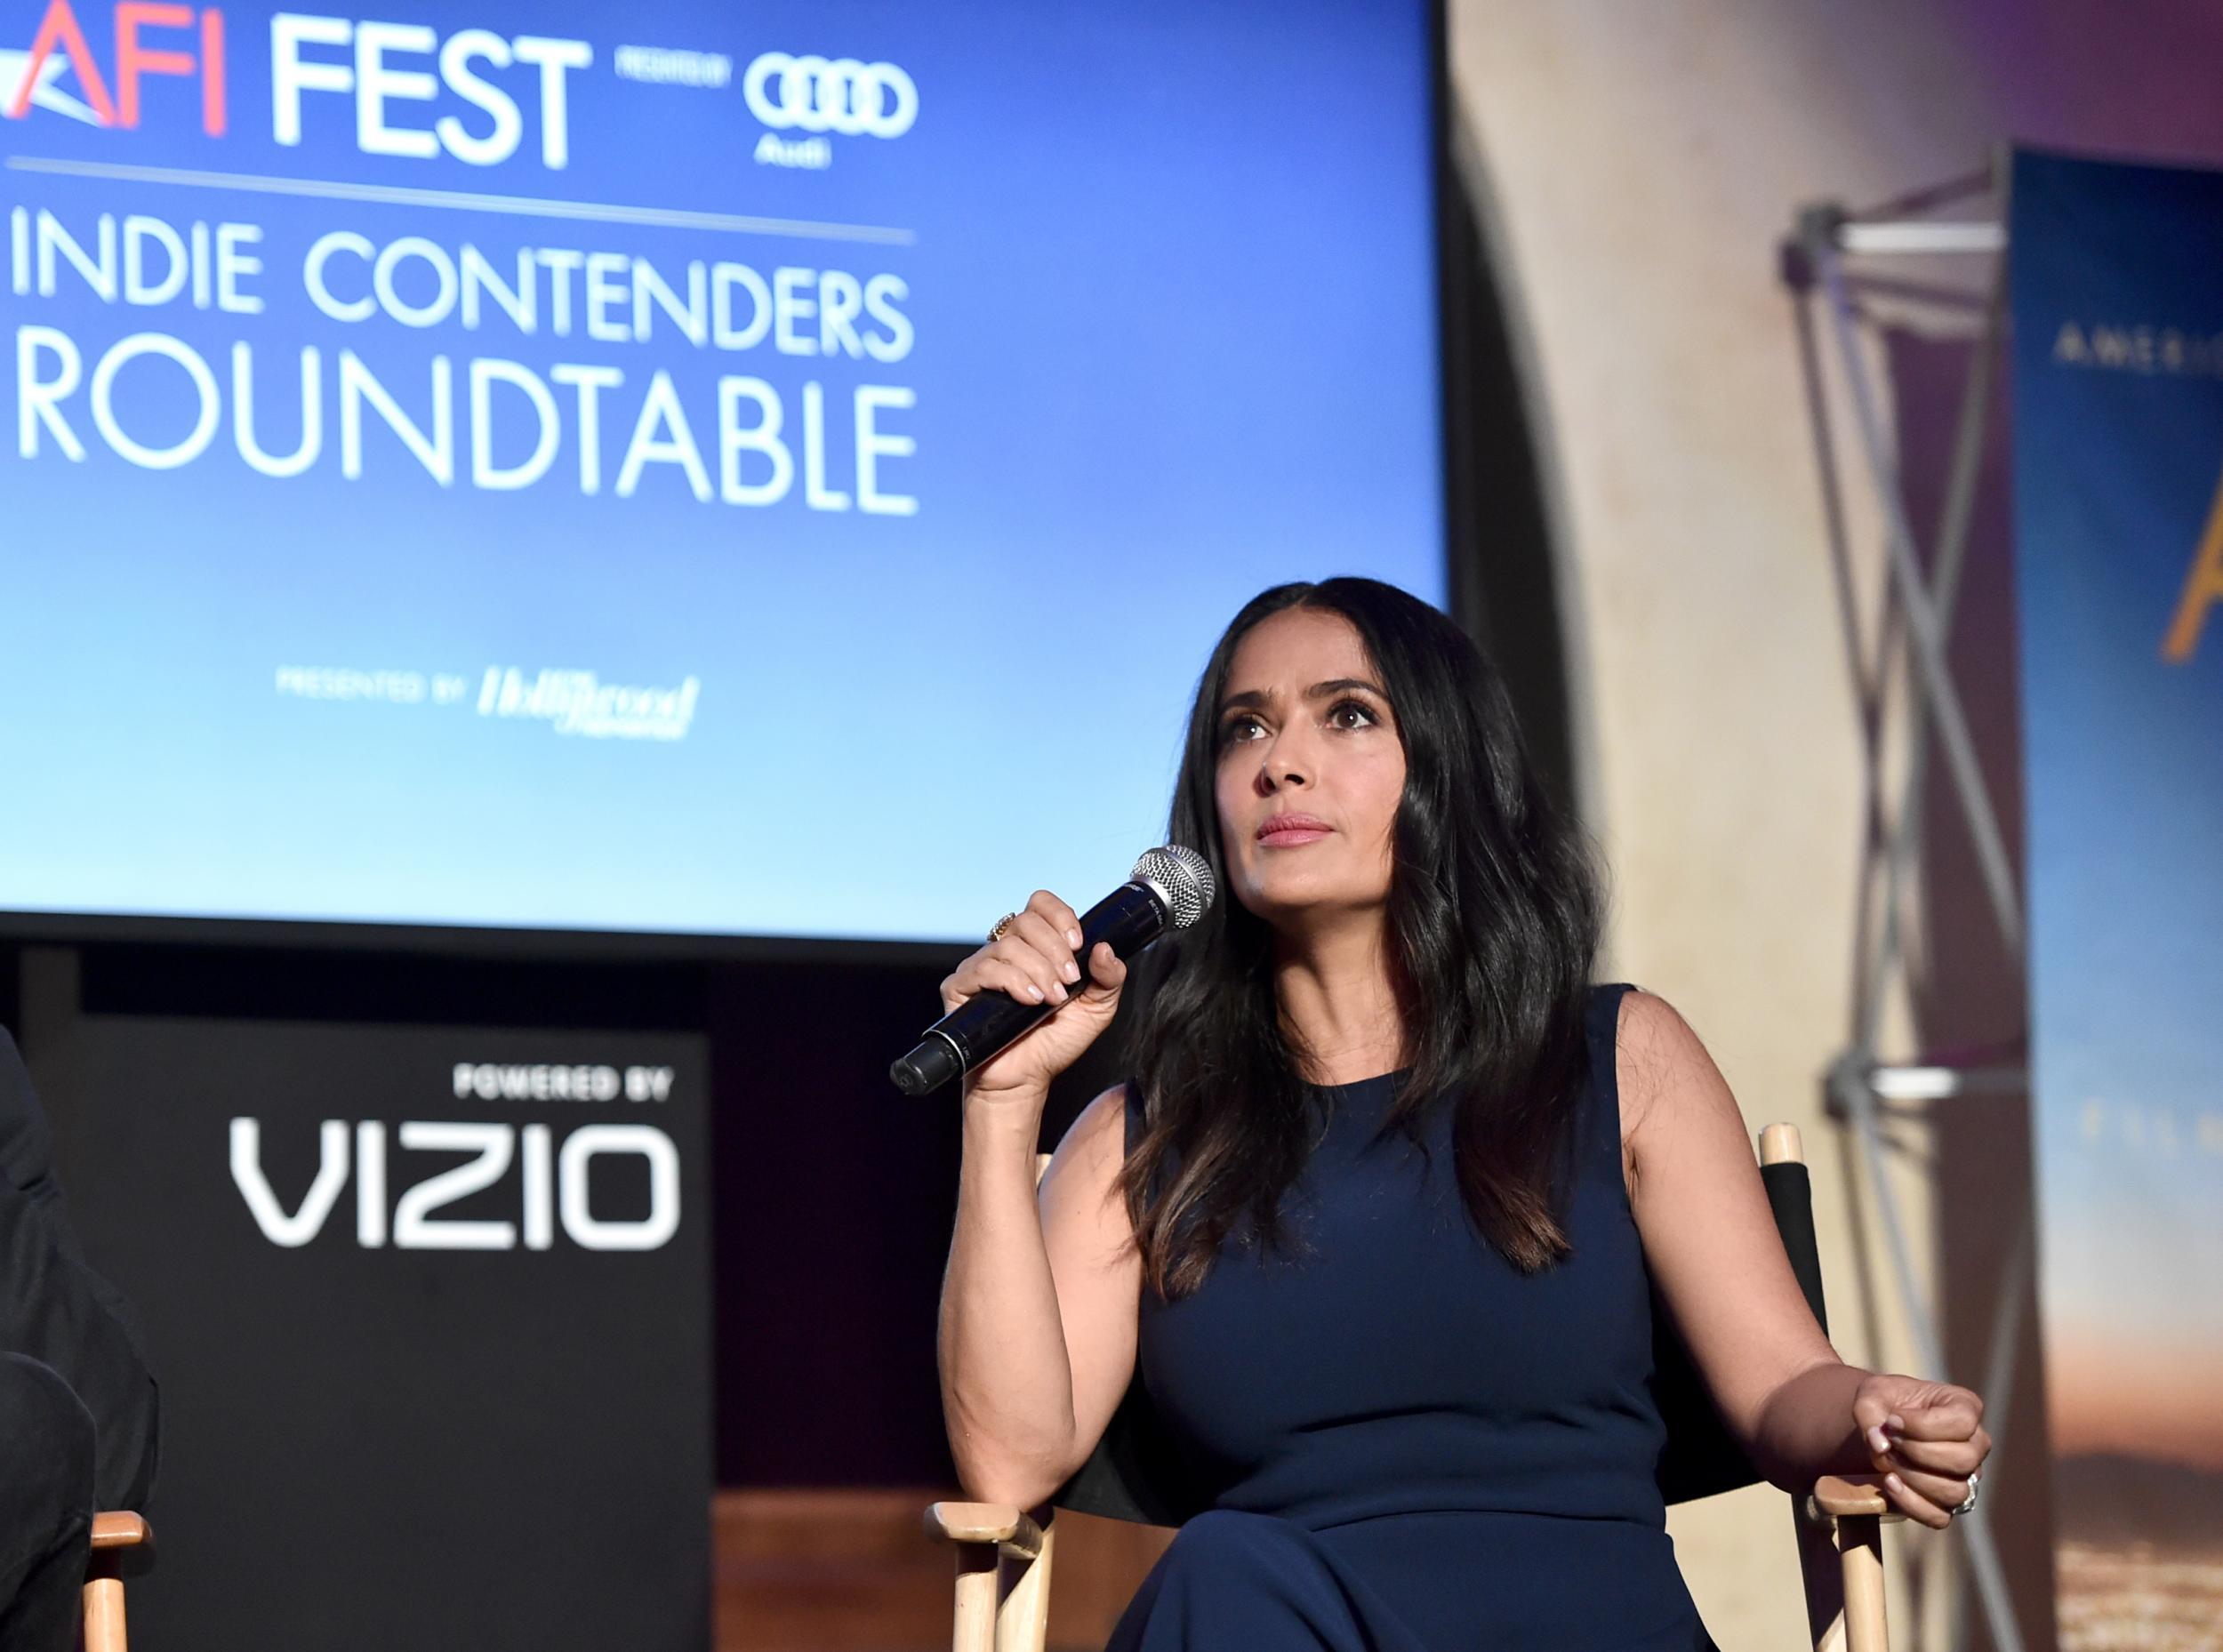 Salma Hayek speaks onstage during 'Indie Contenders Roundtable' at AFI FEST 2017 Presented By Audi at Hollywood Roosevelt Hotel on November 12, 2017 in Hollywood, California. Credit: Alberto E. Rodriguez/Getty Images for AFI.